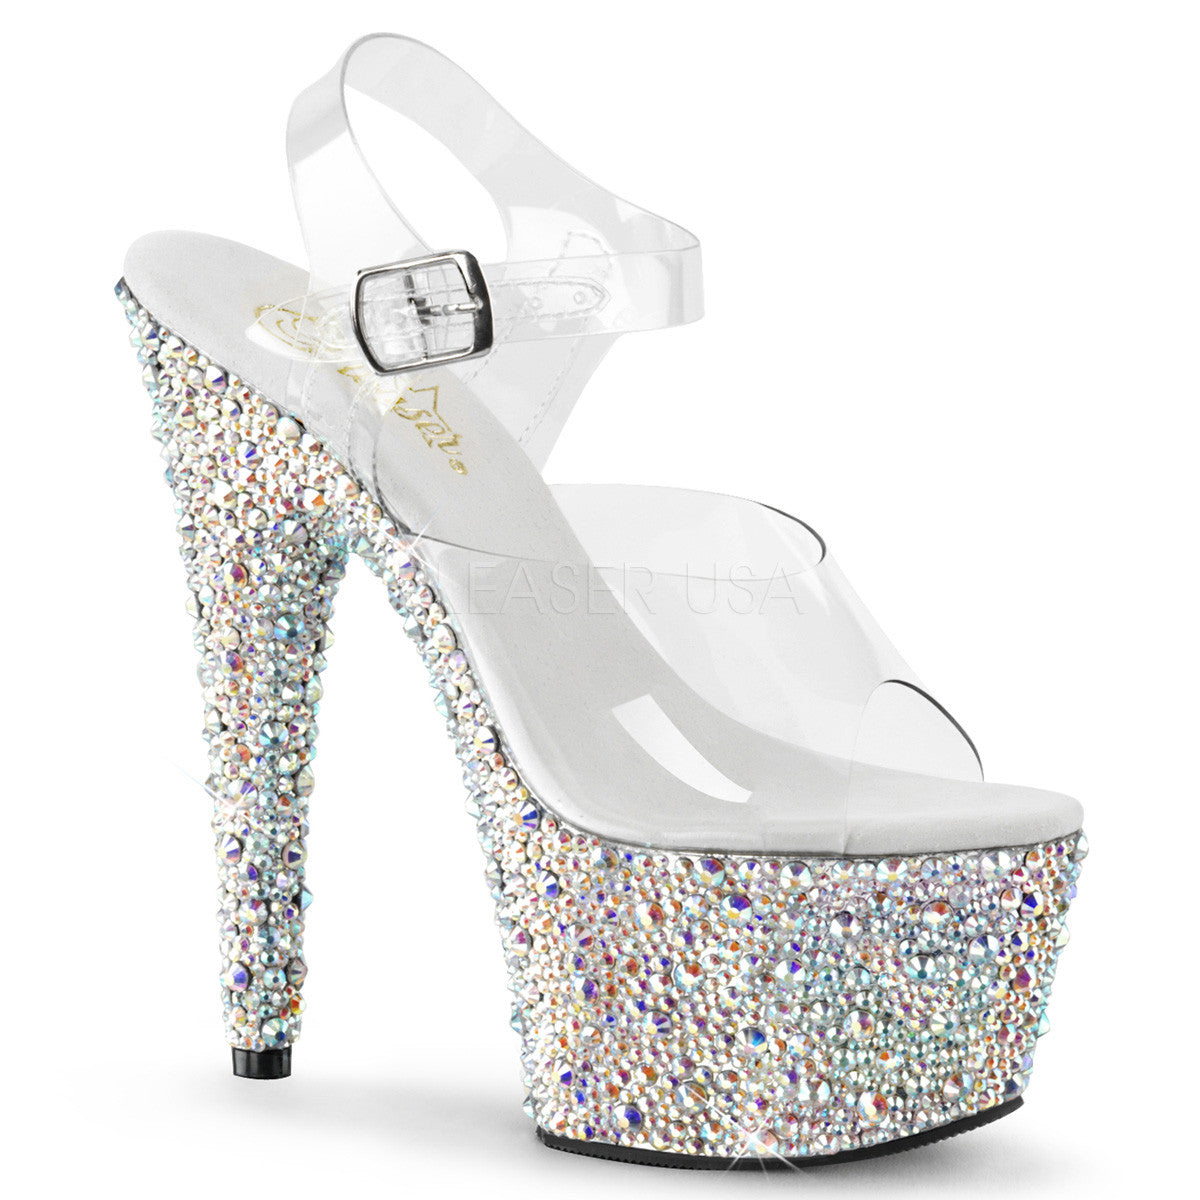 Pleaser BEJEWELED-708MS Clear Ankle Strap Sandals With Silver Multi Rhinestones Platform - Shoecup.com - 1